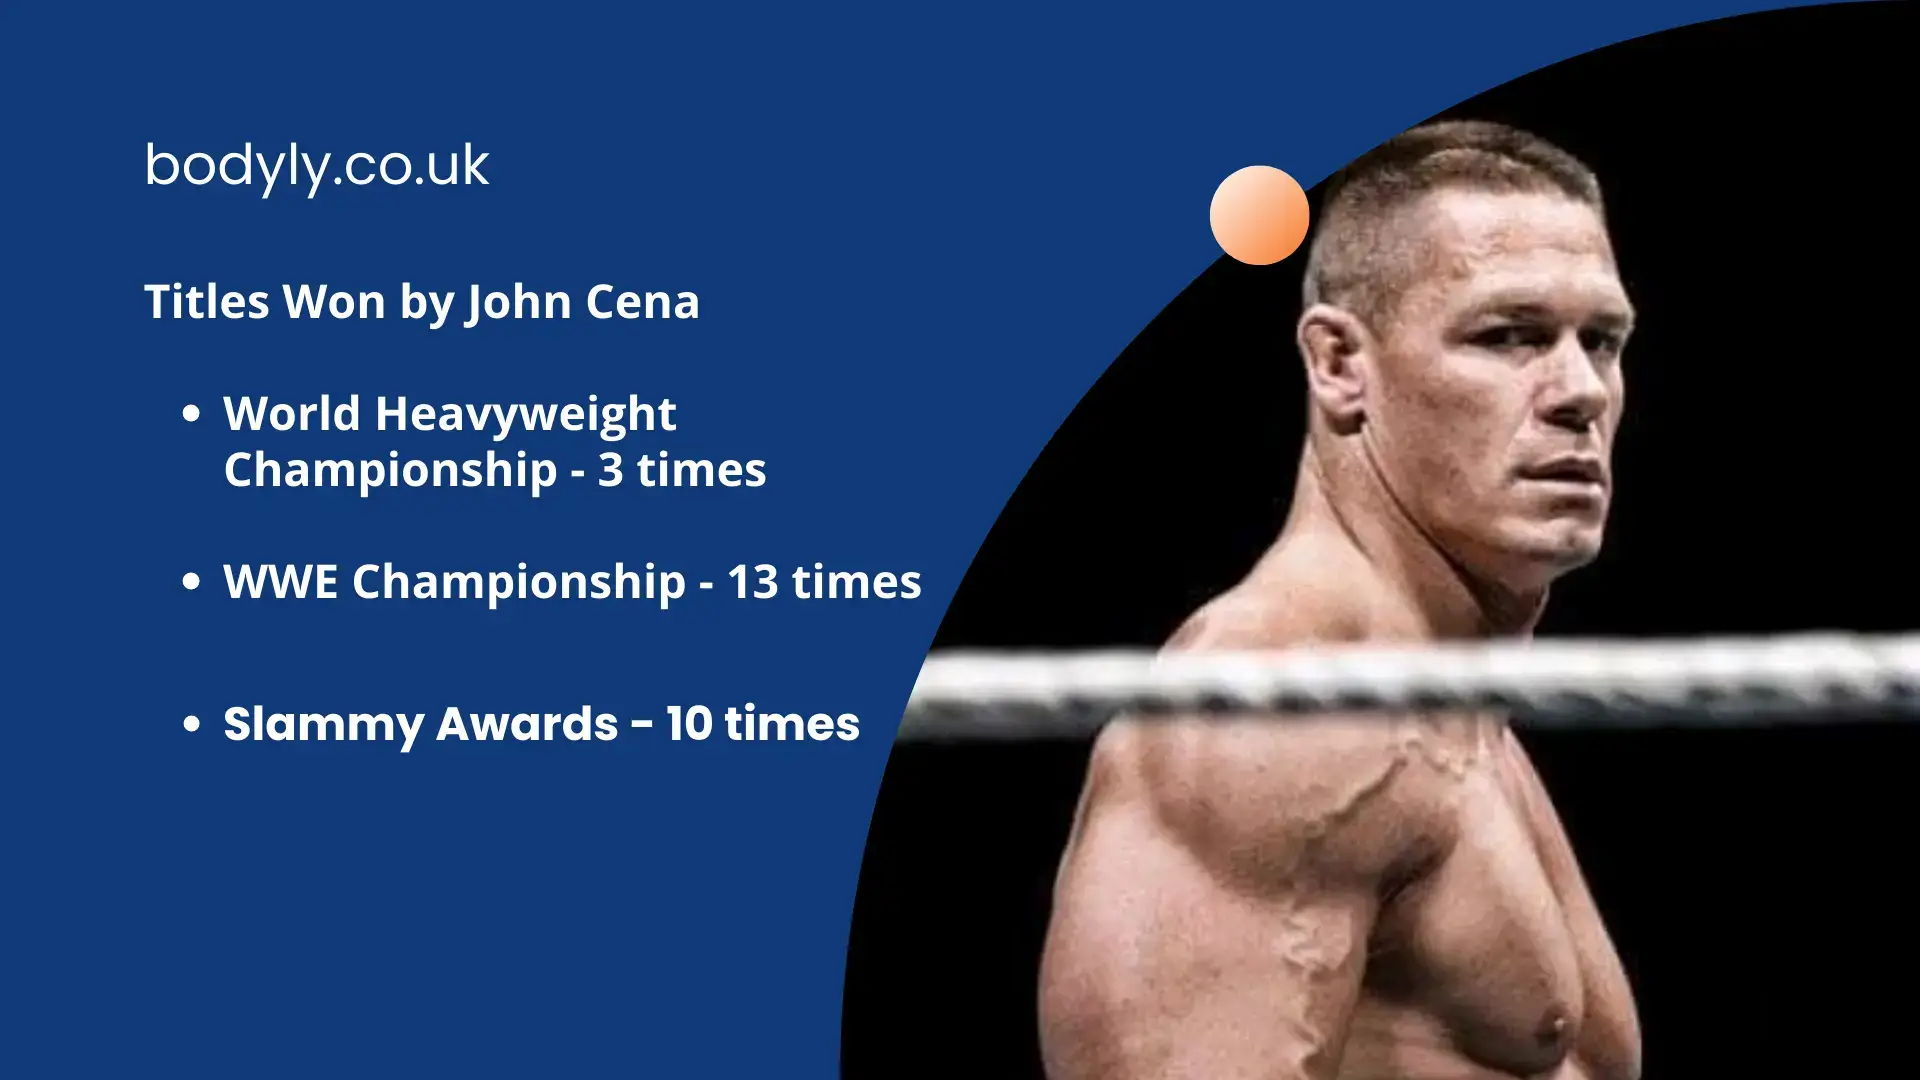 is john cena on steroids or natural